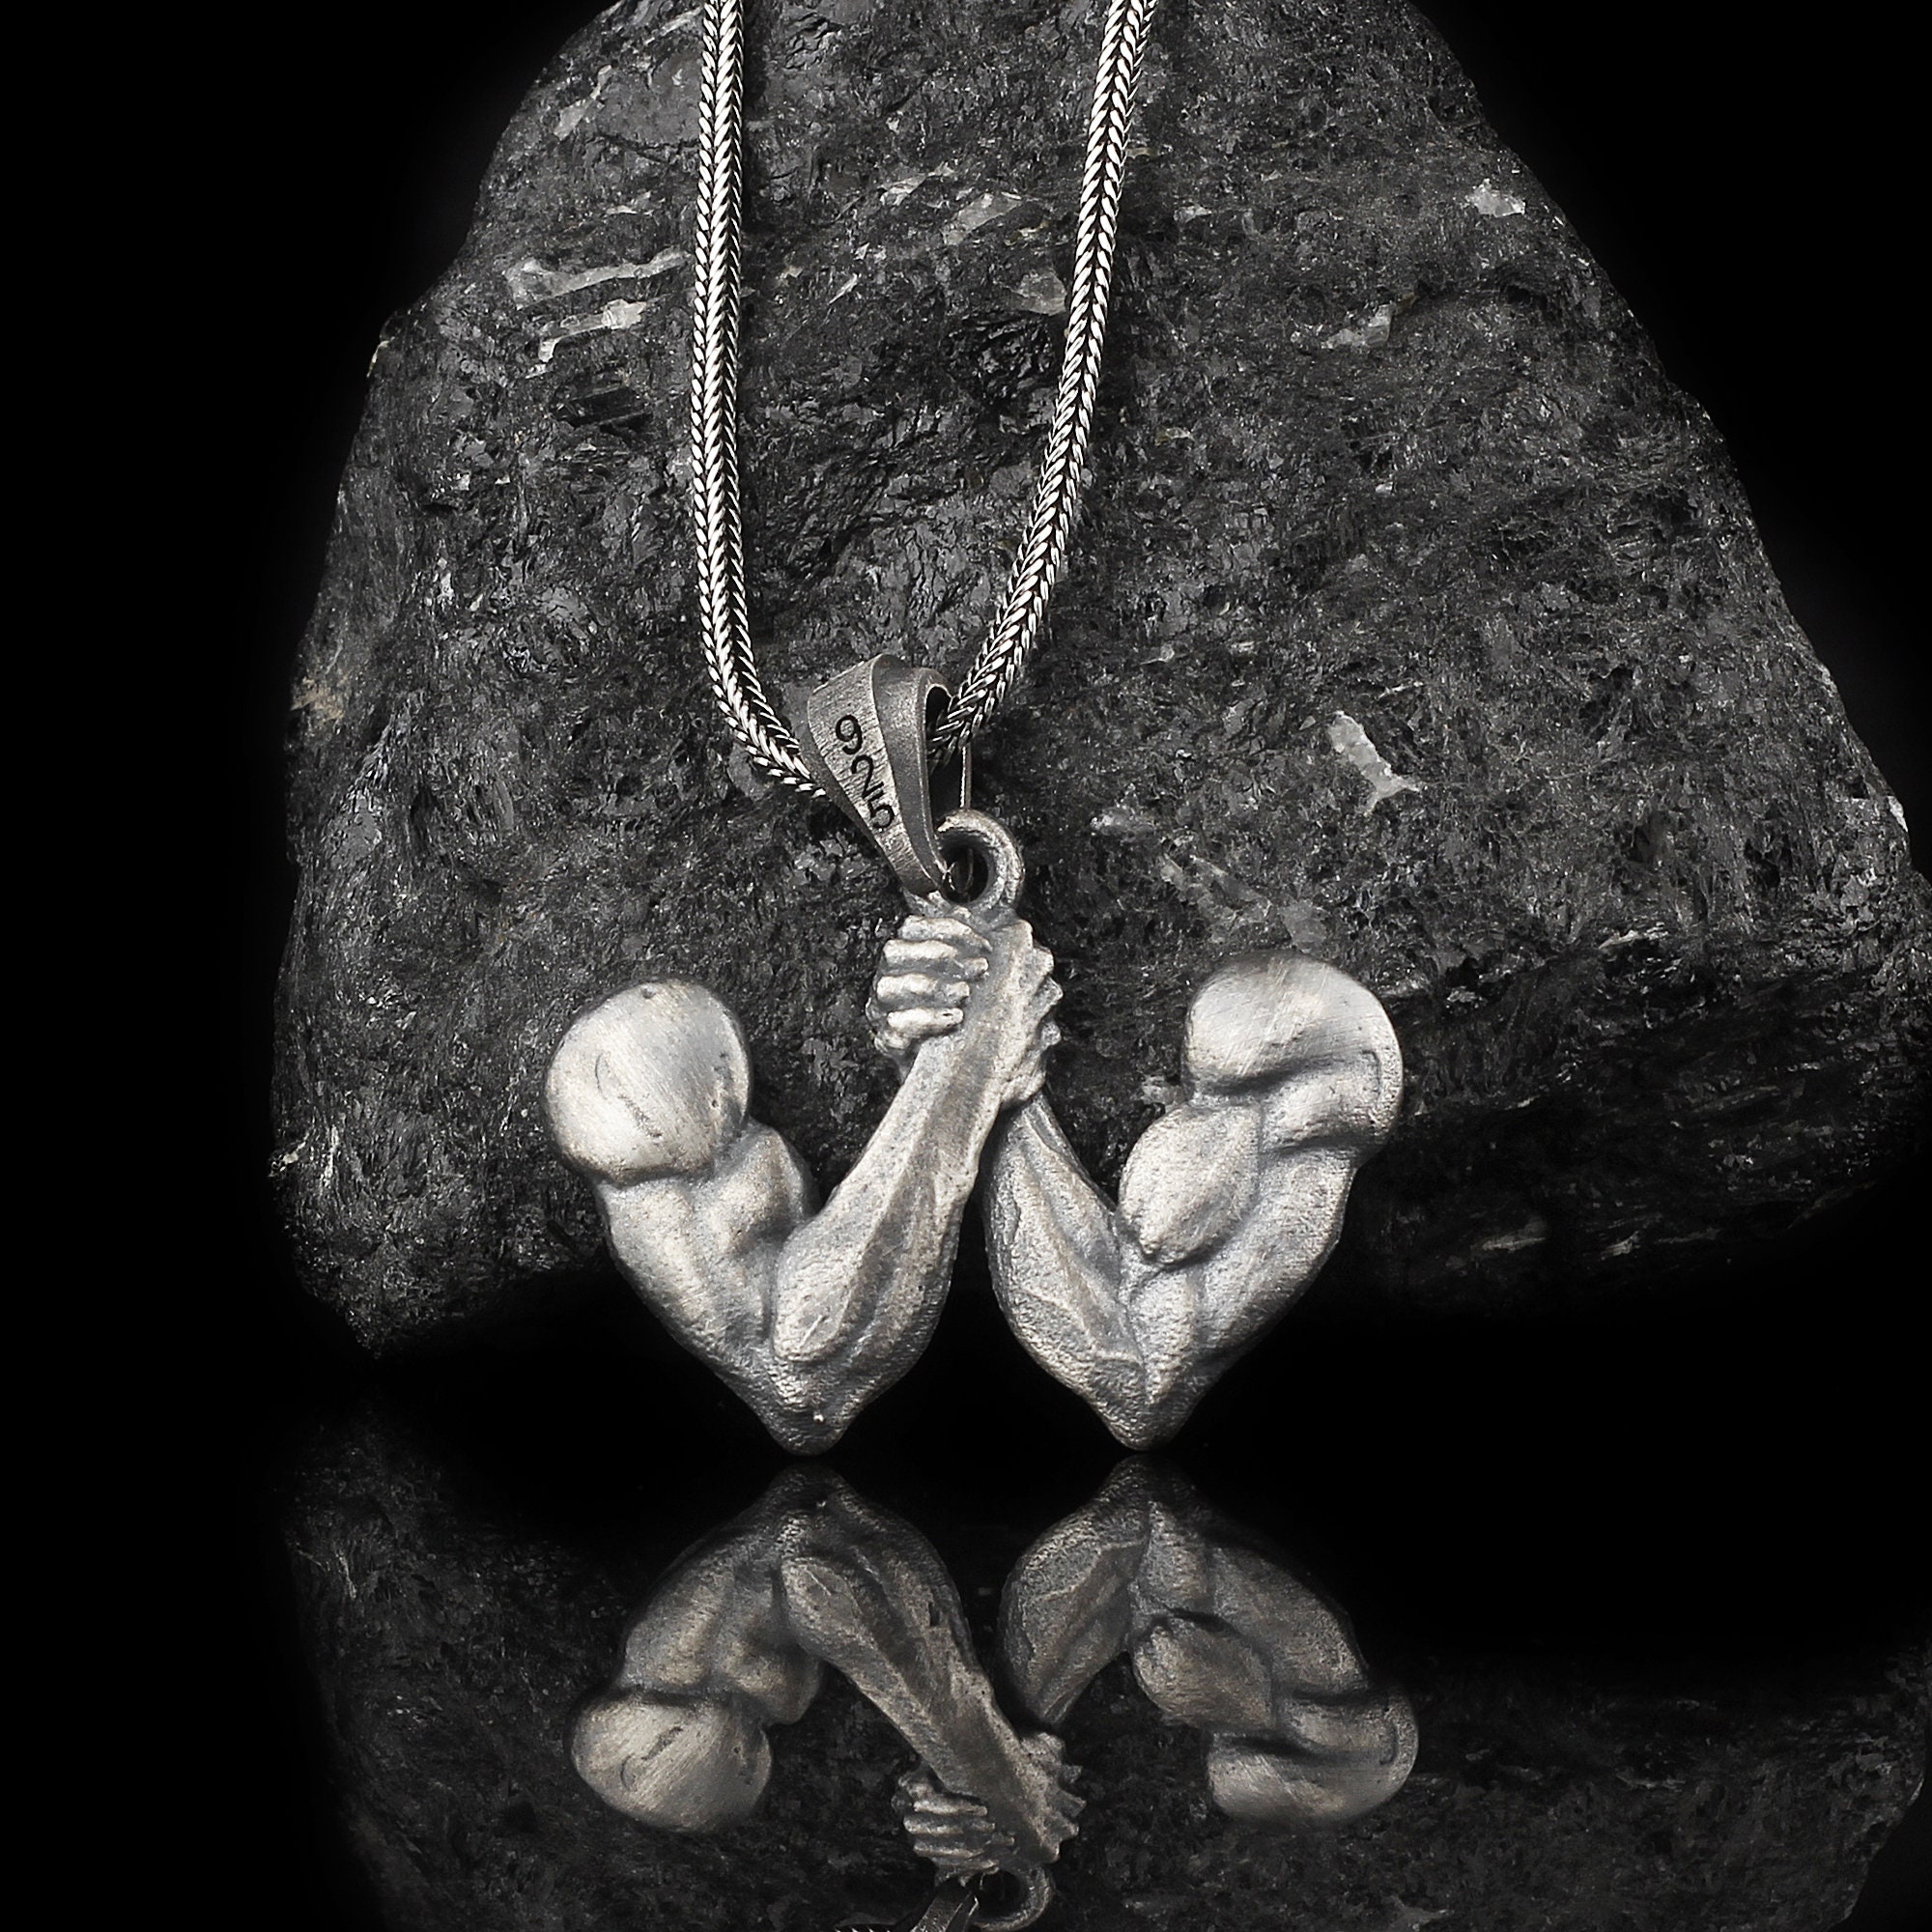 Body Builder Necklace | Gifts for Bodybuilders or Fitness Instructor Gifts  Gym Jewelry for Men and Women or Gifts for Crossfit Women Bodybuilding